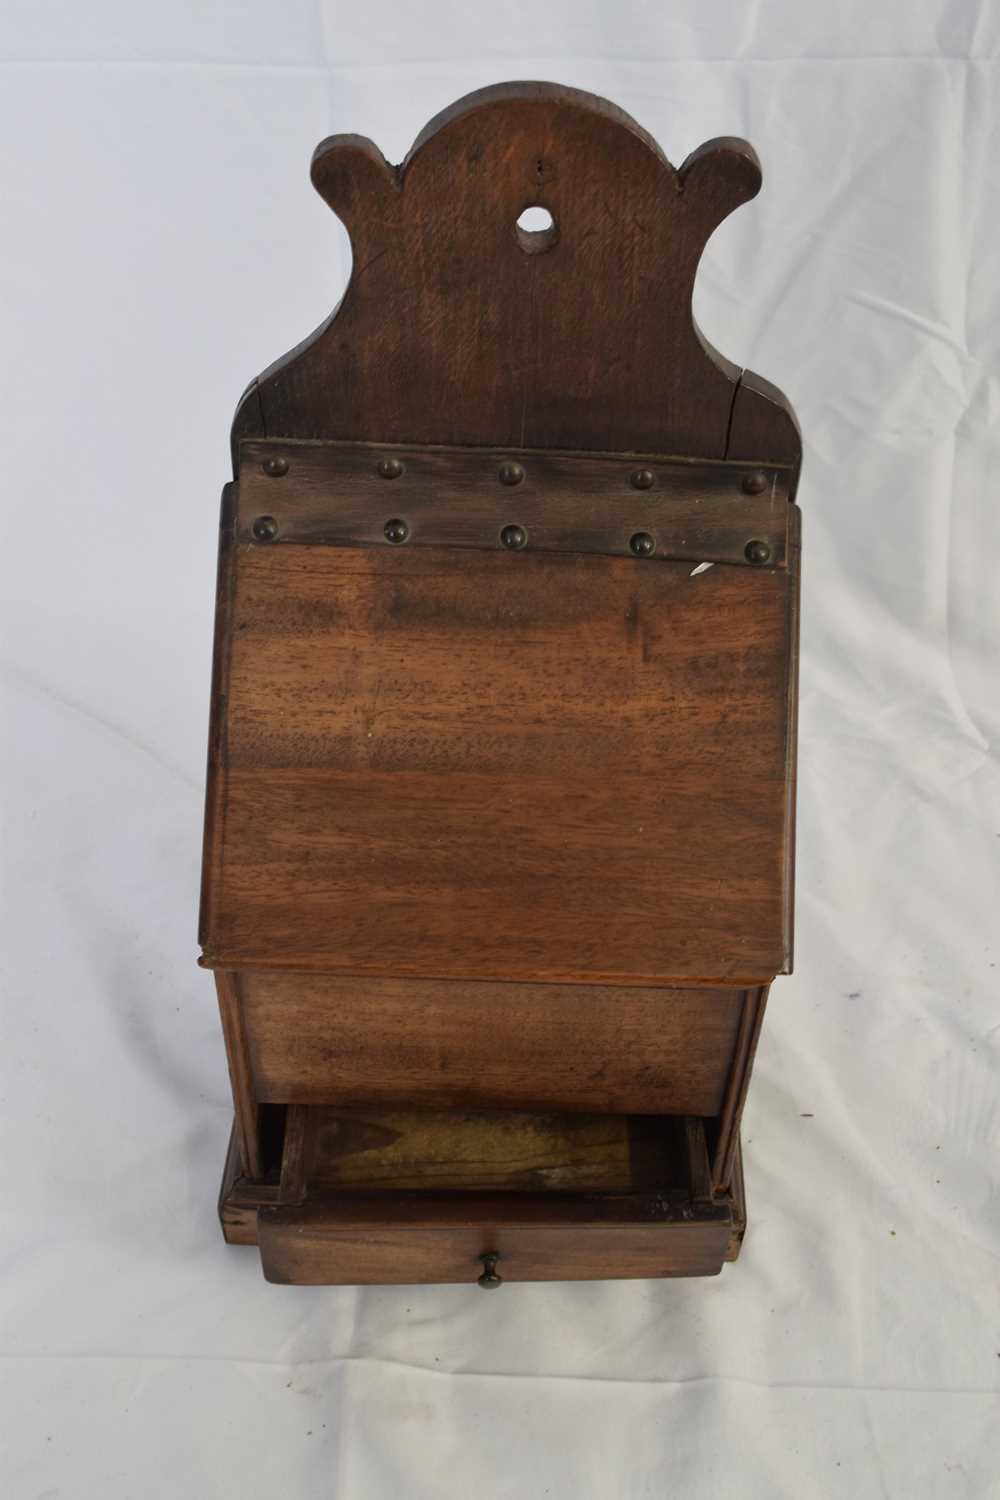 Unusual 19th century mahogany salt or storage box with wall mounting, flip lid with leather hinge - Image 3 of 4